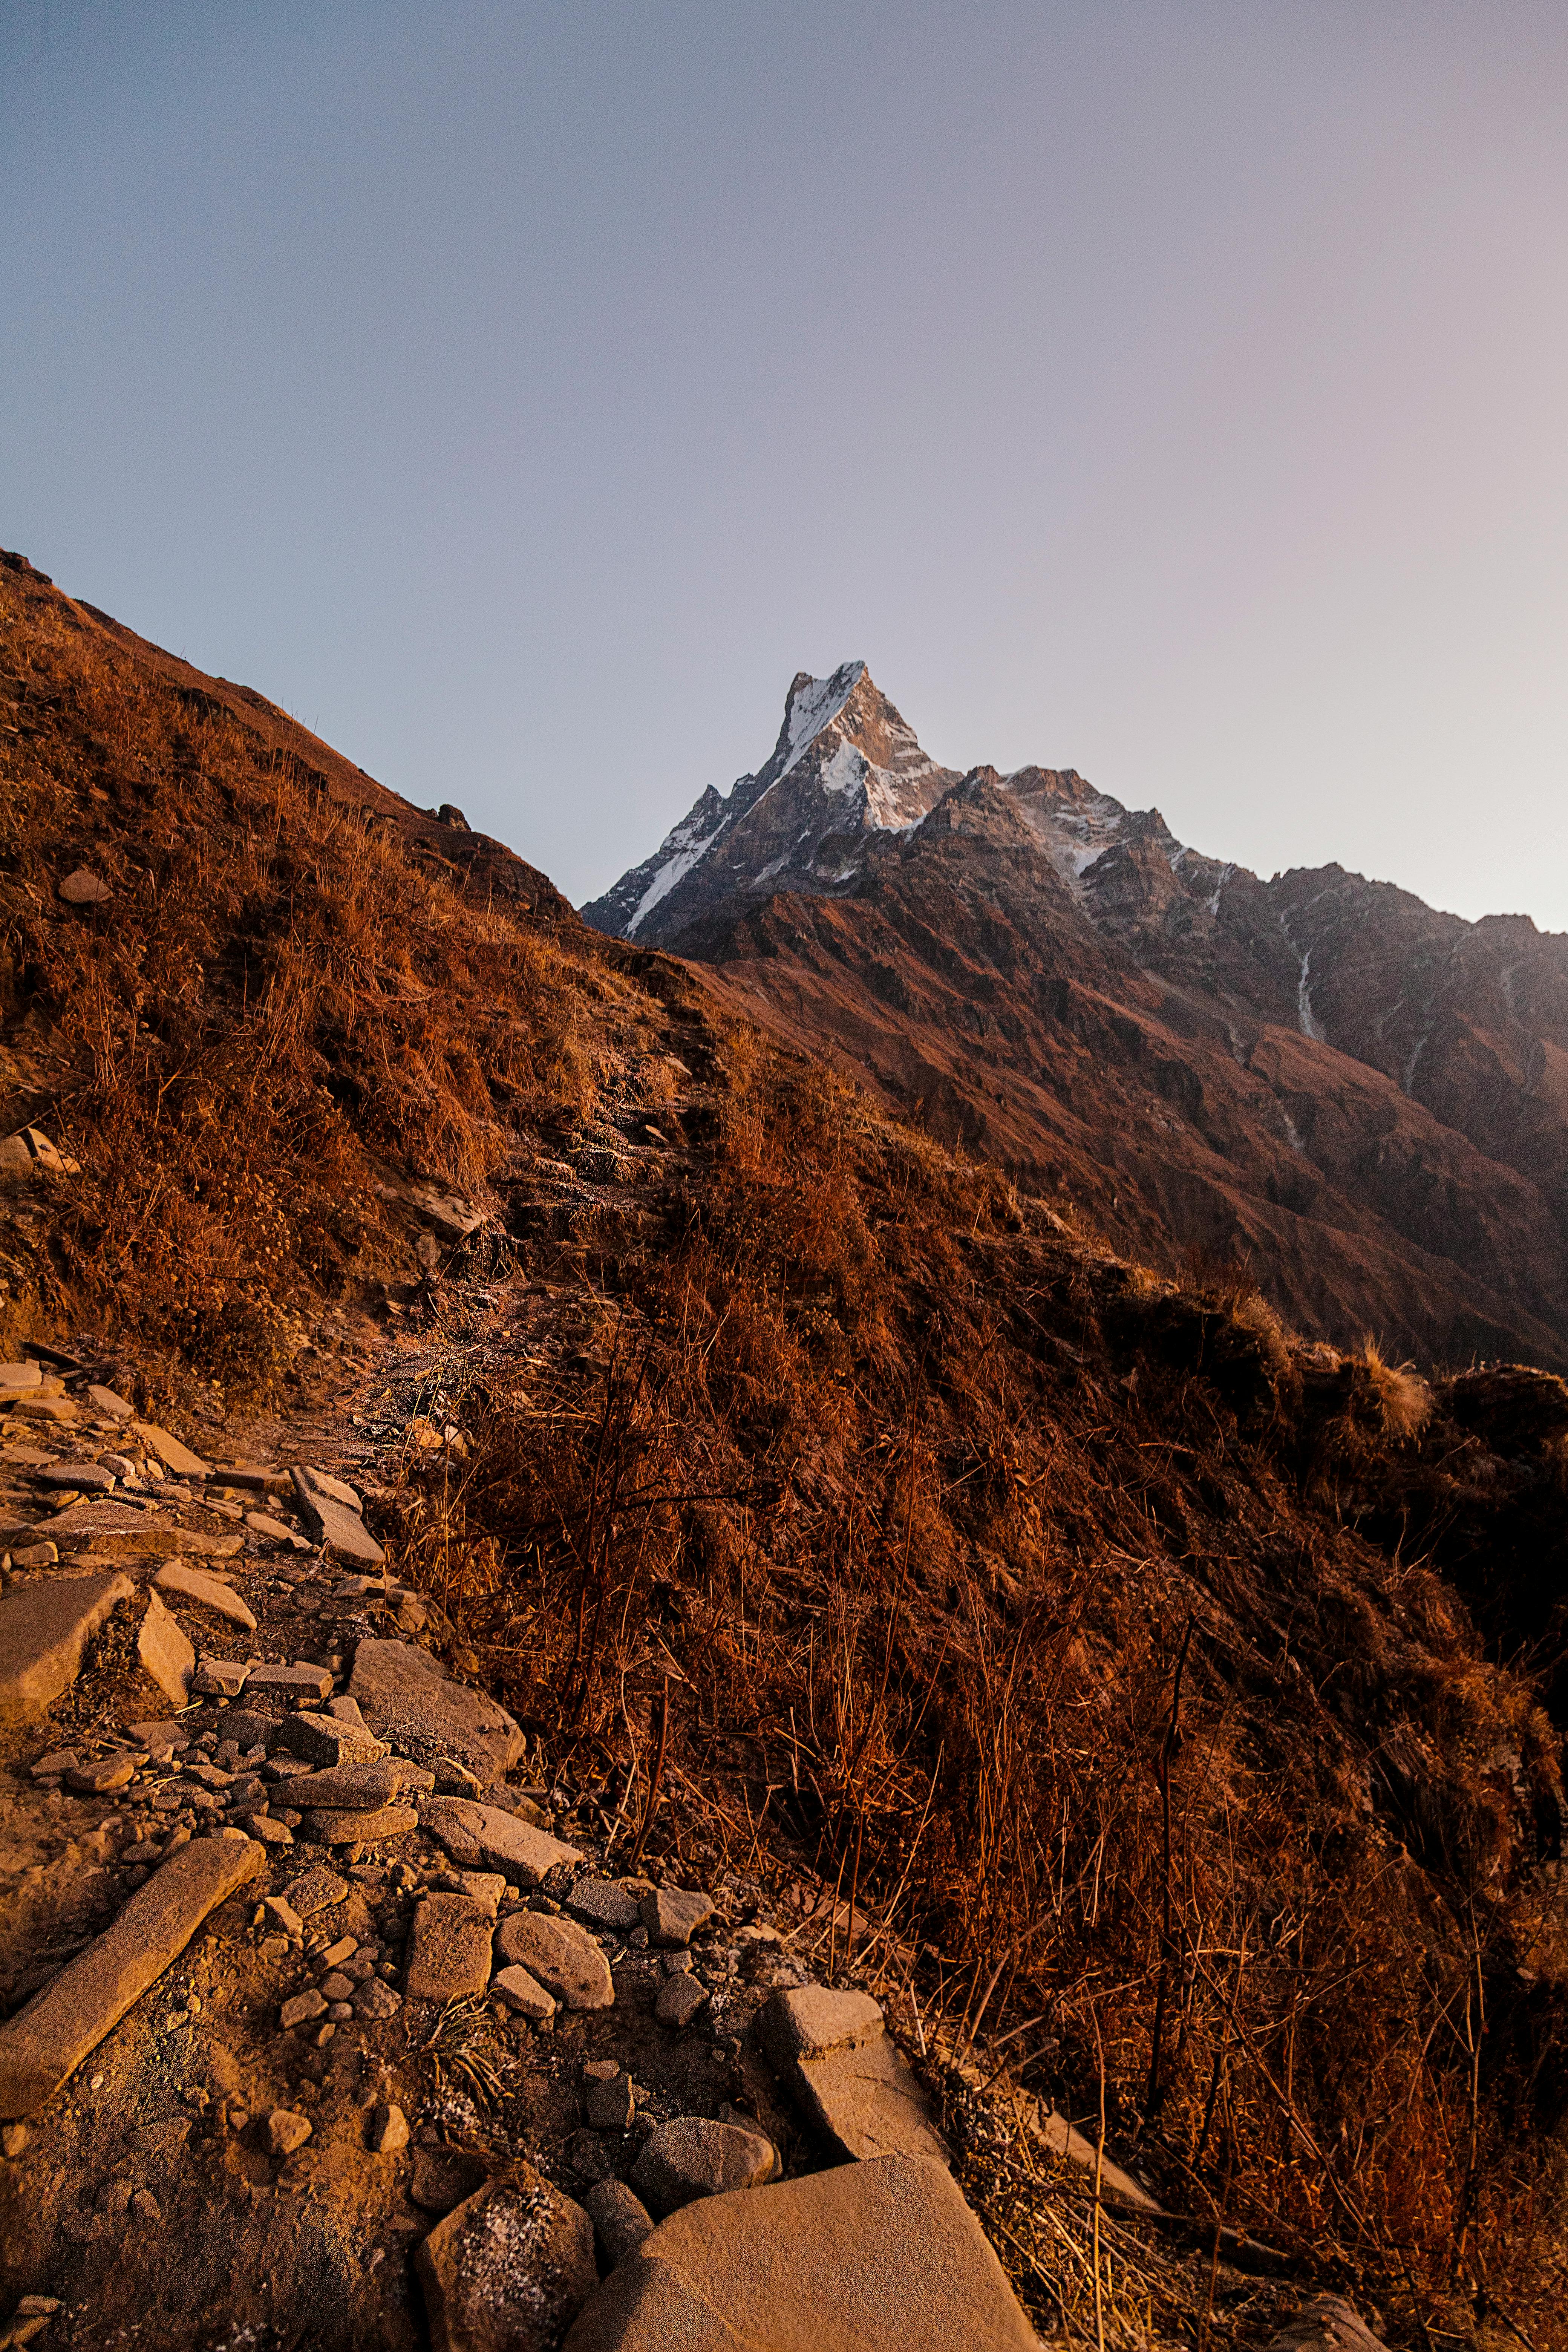 Trekking the Himalayas: A Guide to High-Altitude Adventures